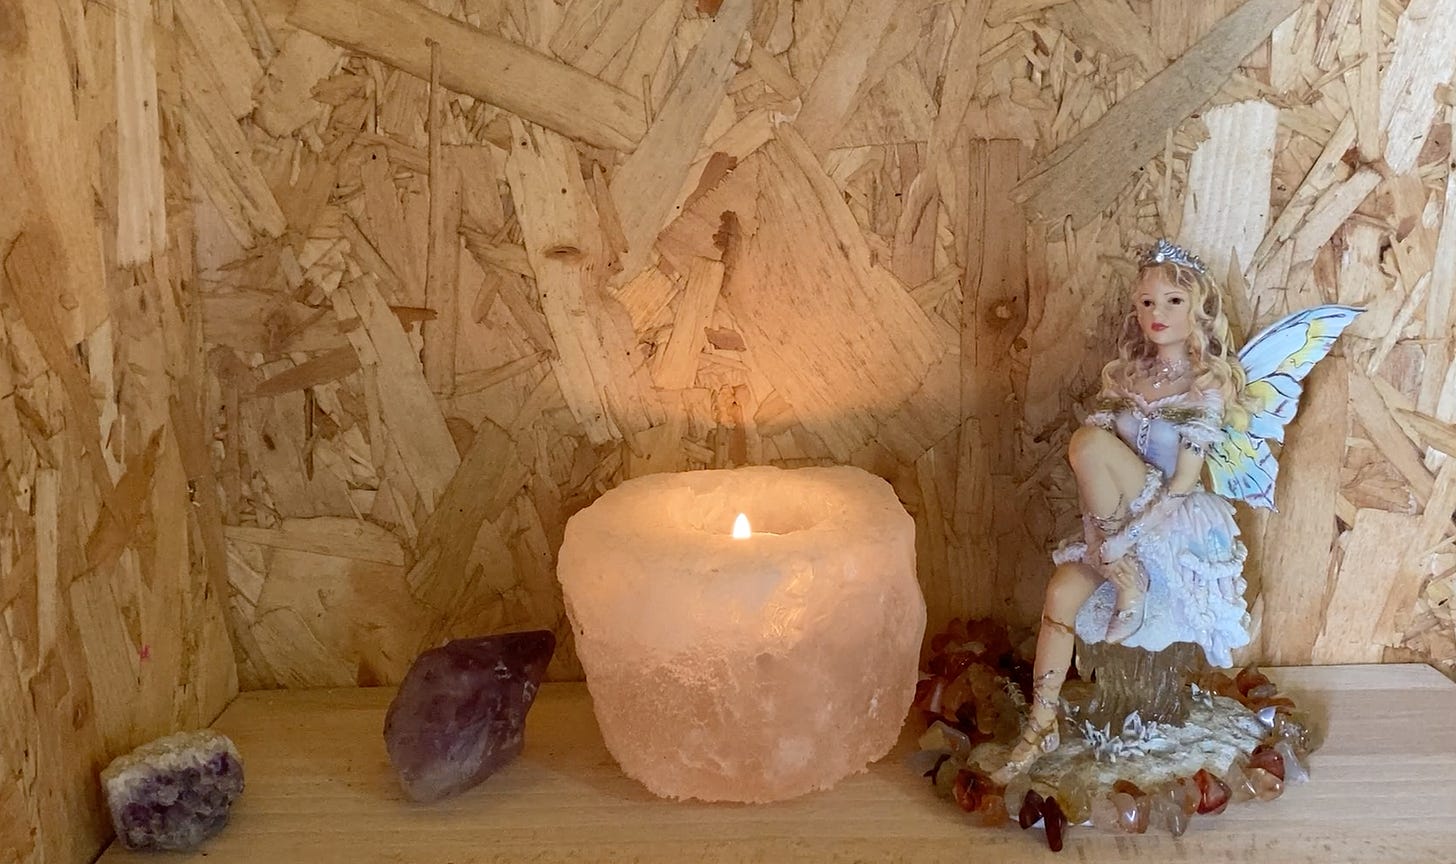 shelf with 2 purple amethysts, a seated fairy and a light candle in a salt holder